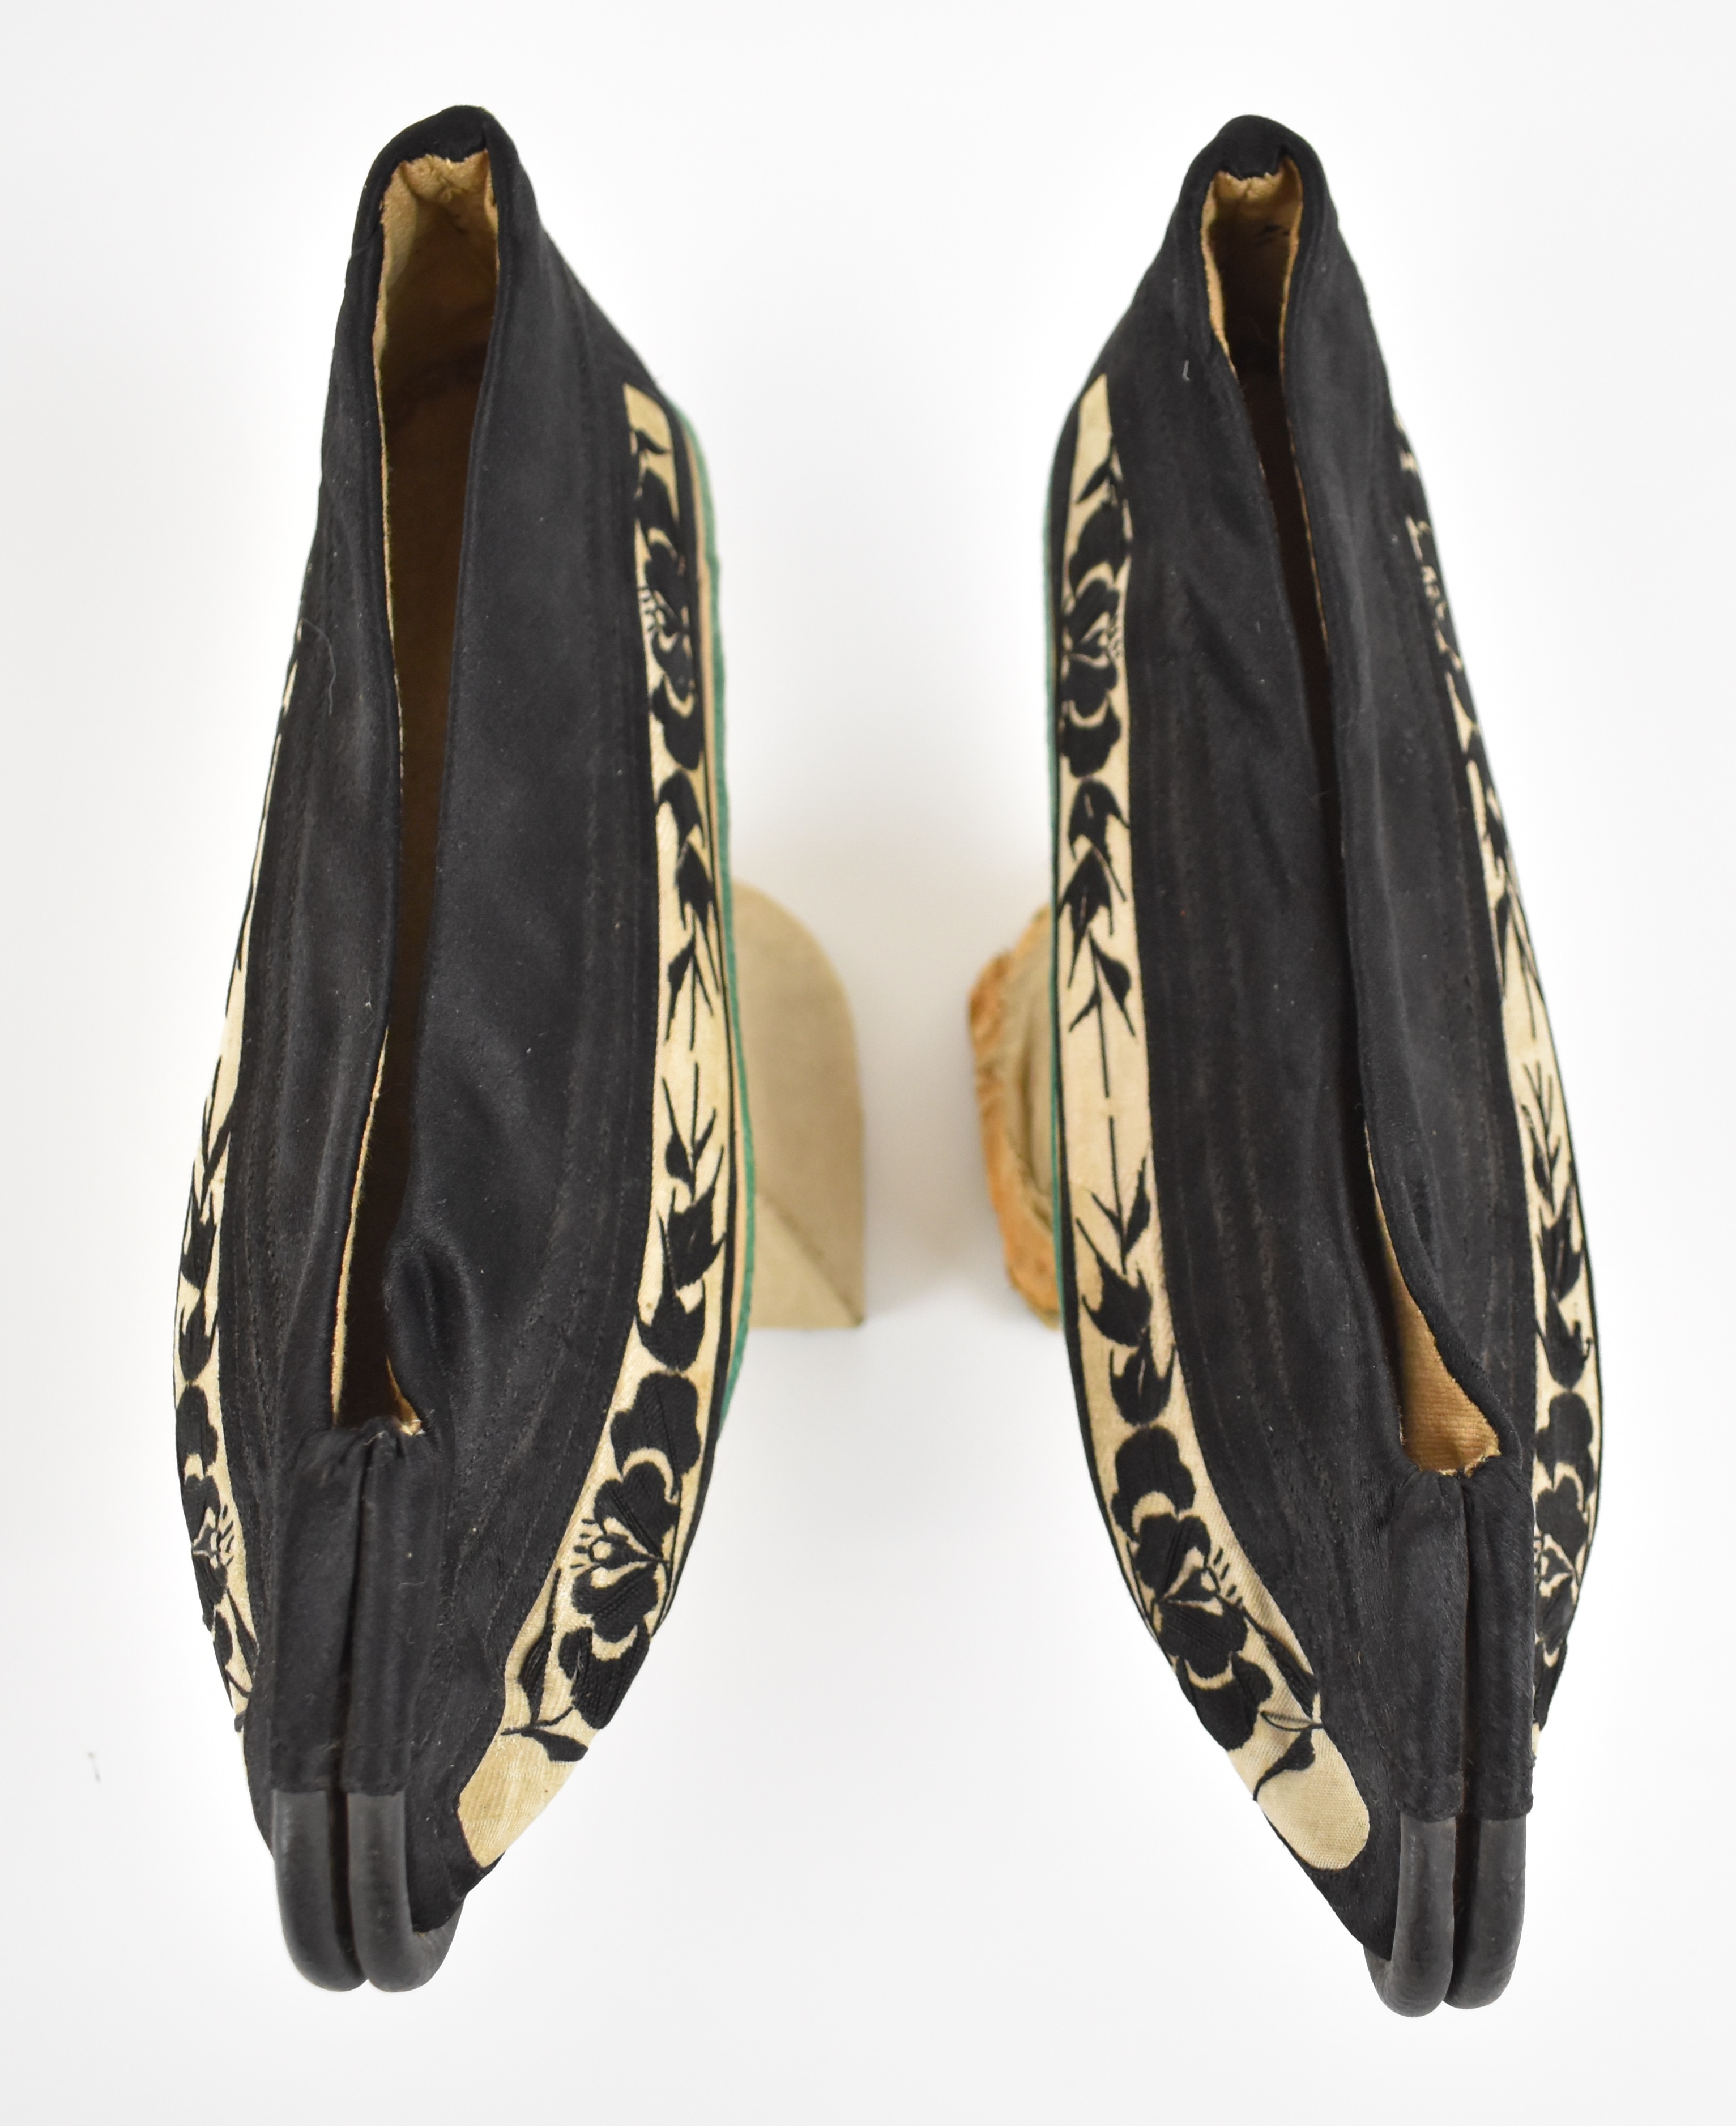 Pair of 19thC Chinese embroidered platform shoes, height 31 x length 21cm - Image 6 of 7